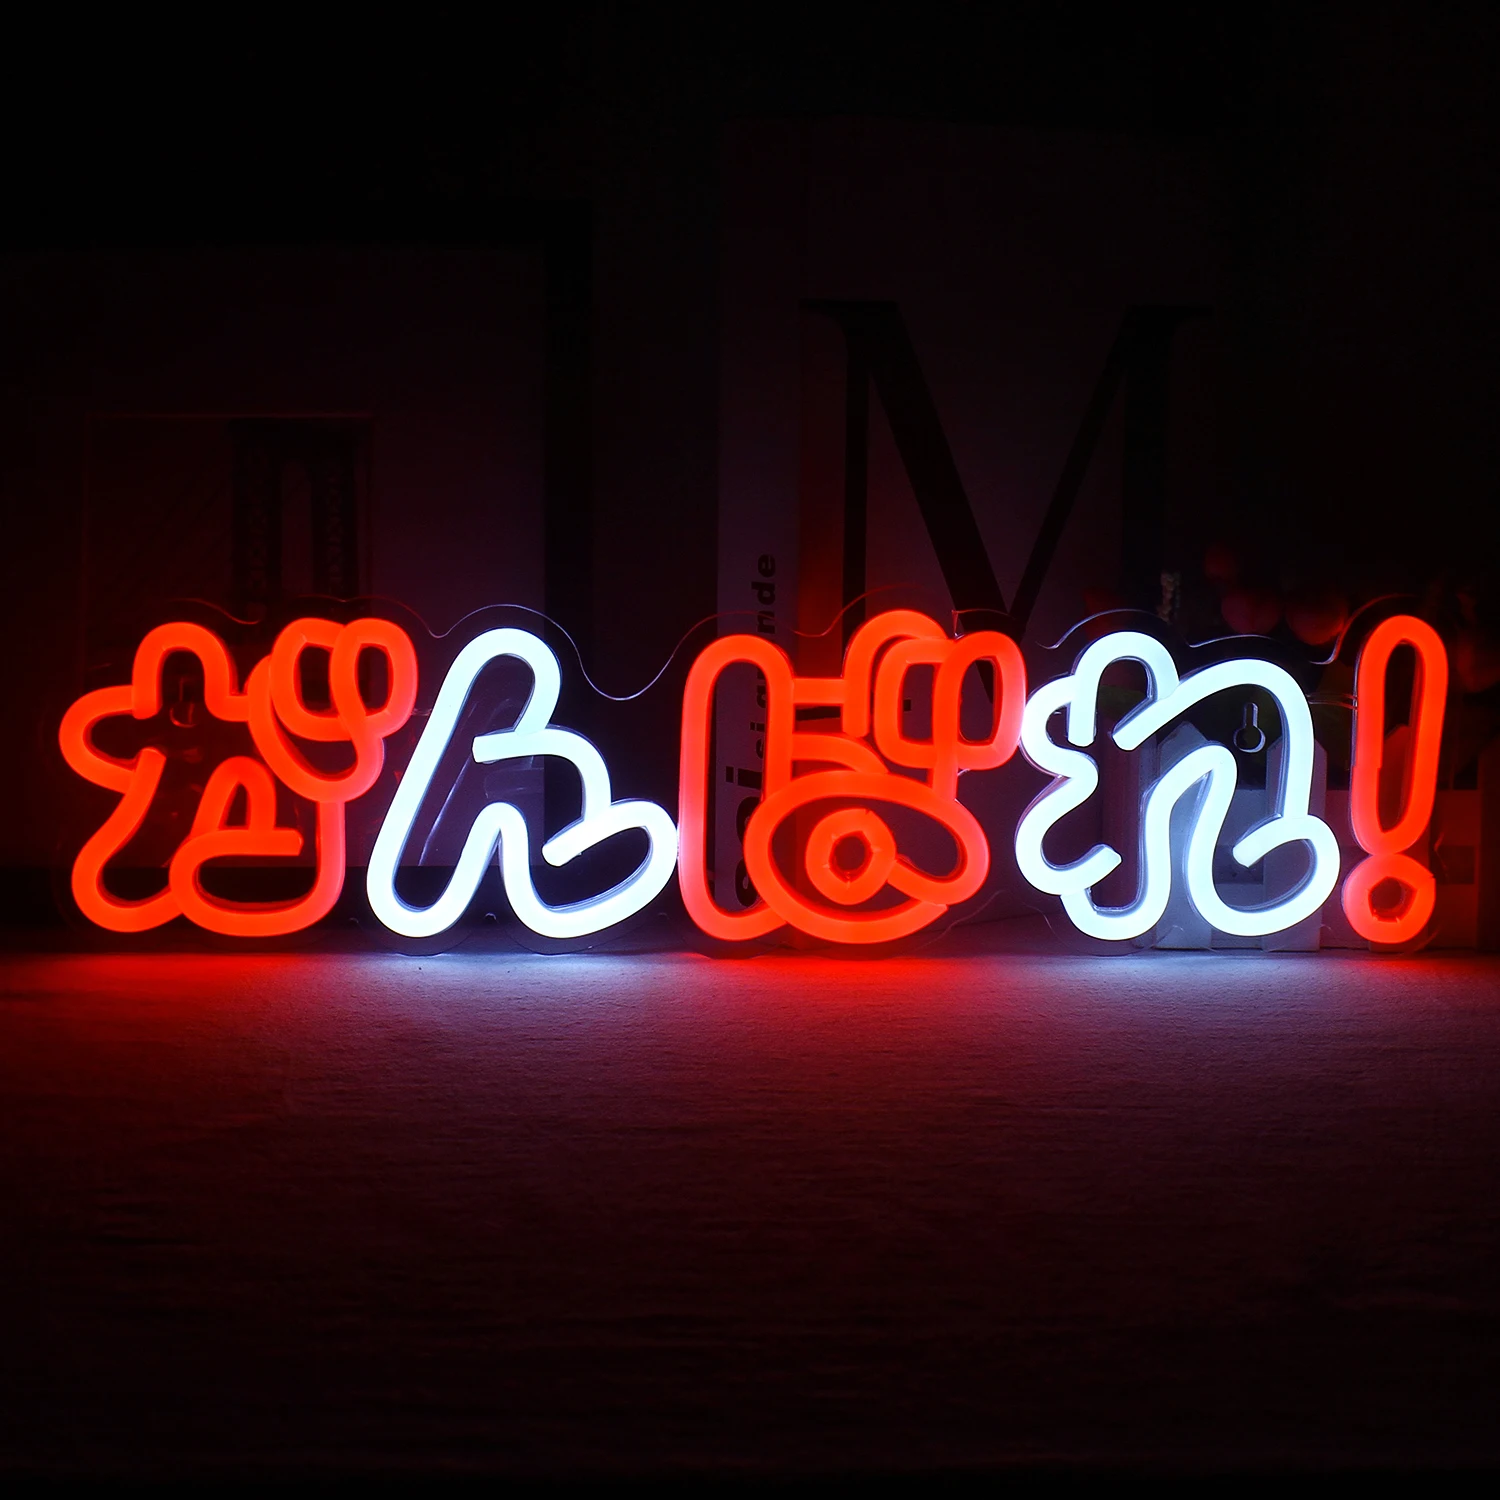 Language Come On Neon Sign Wall Decor For Office Home Room Store Studio Party Girl's Bedroom LED Neon Light Decoration USB